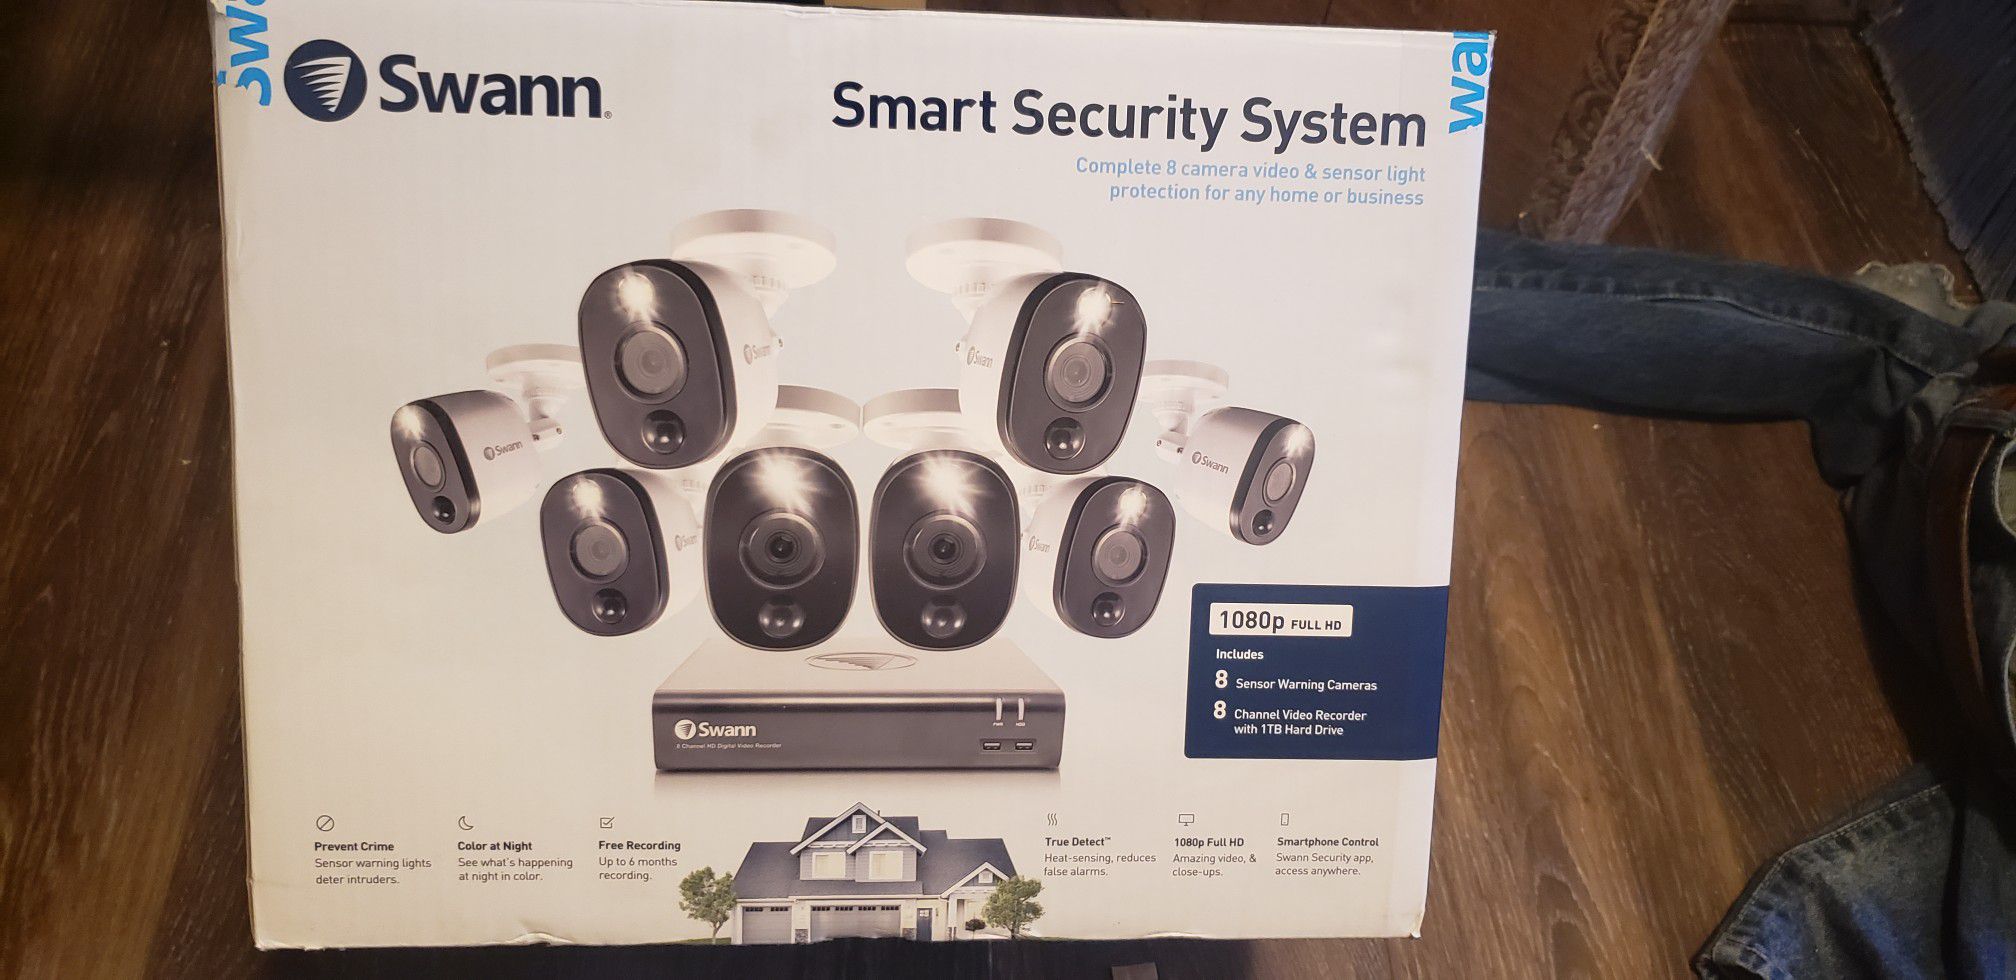 Swann smart security system use with Alaxis and Google